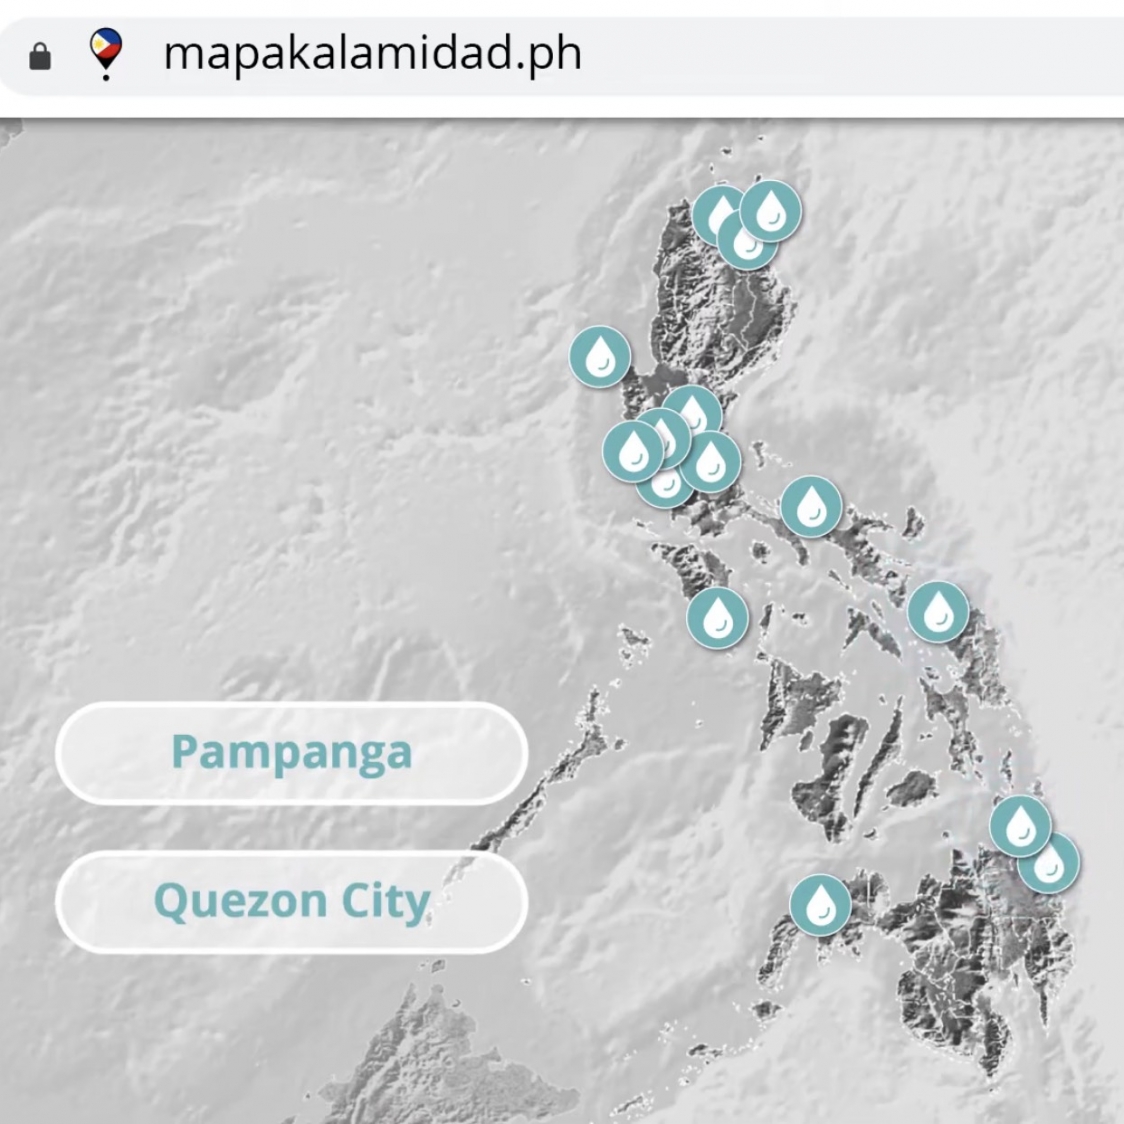 Data sharing platform designed in the Philippines to locate map flooded areas during disasters